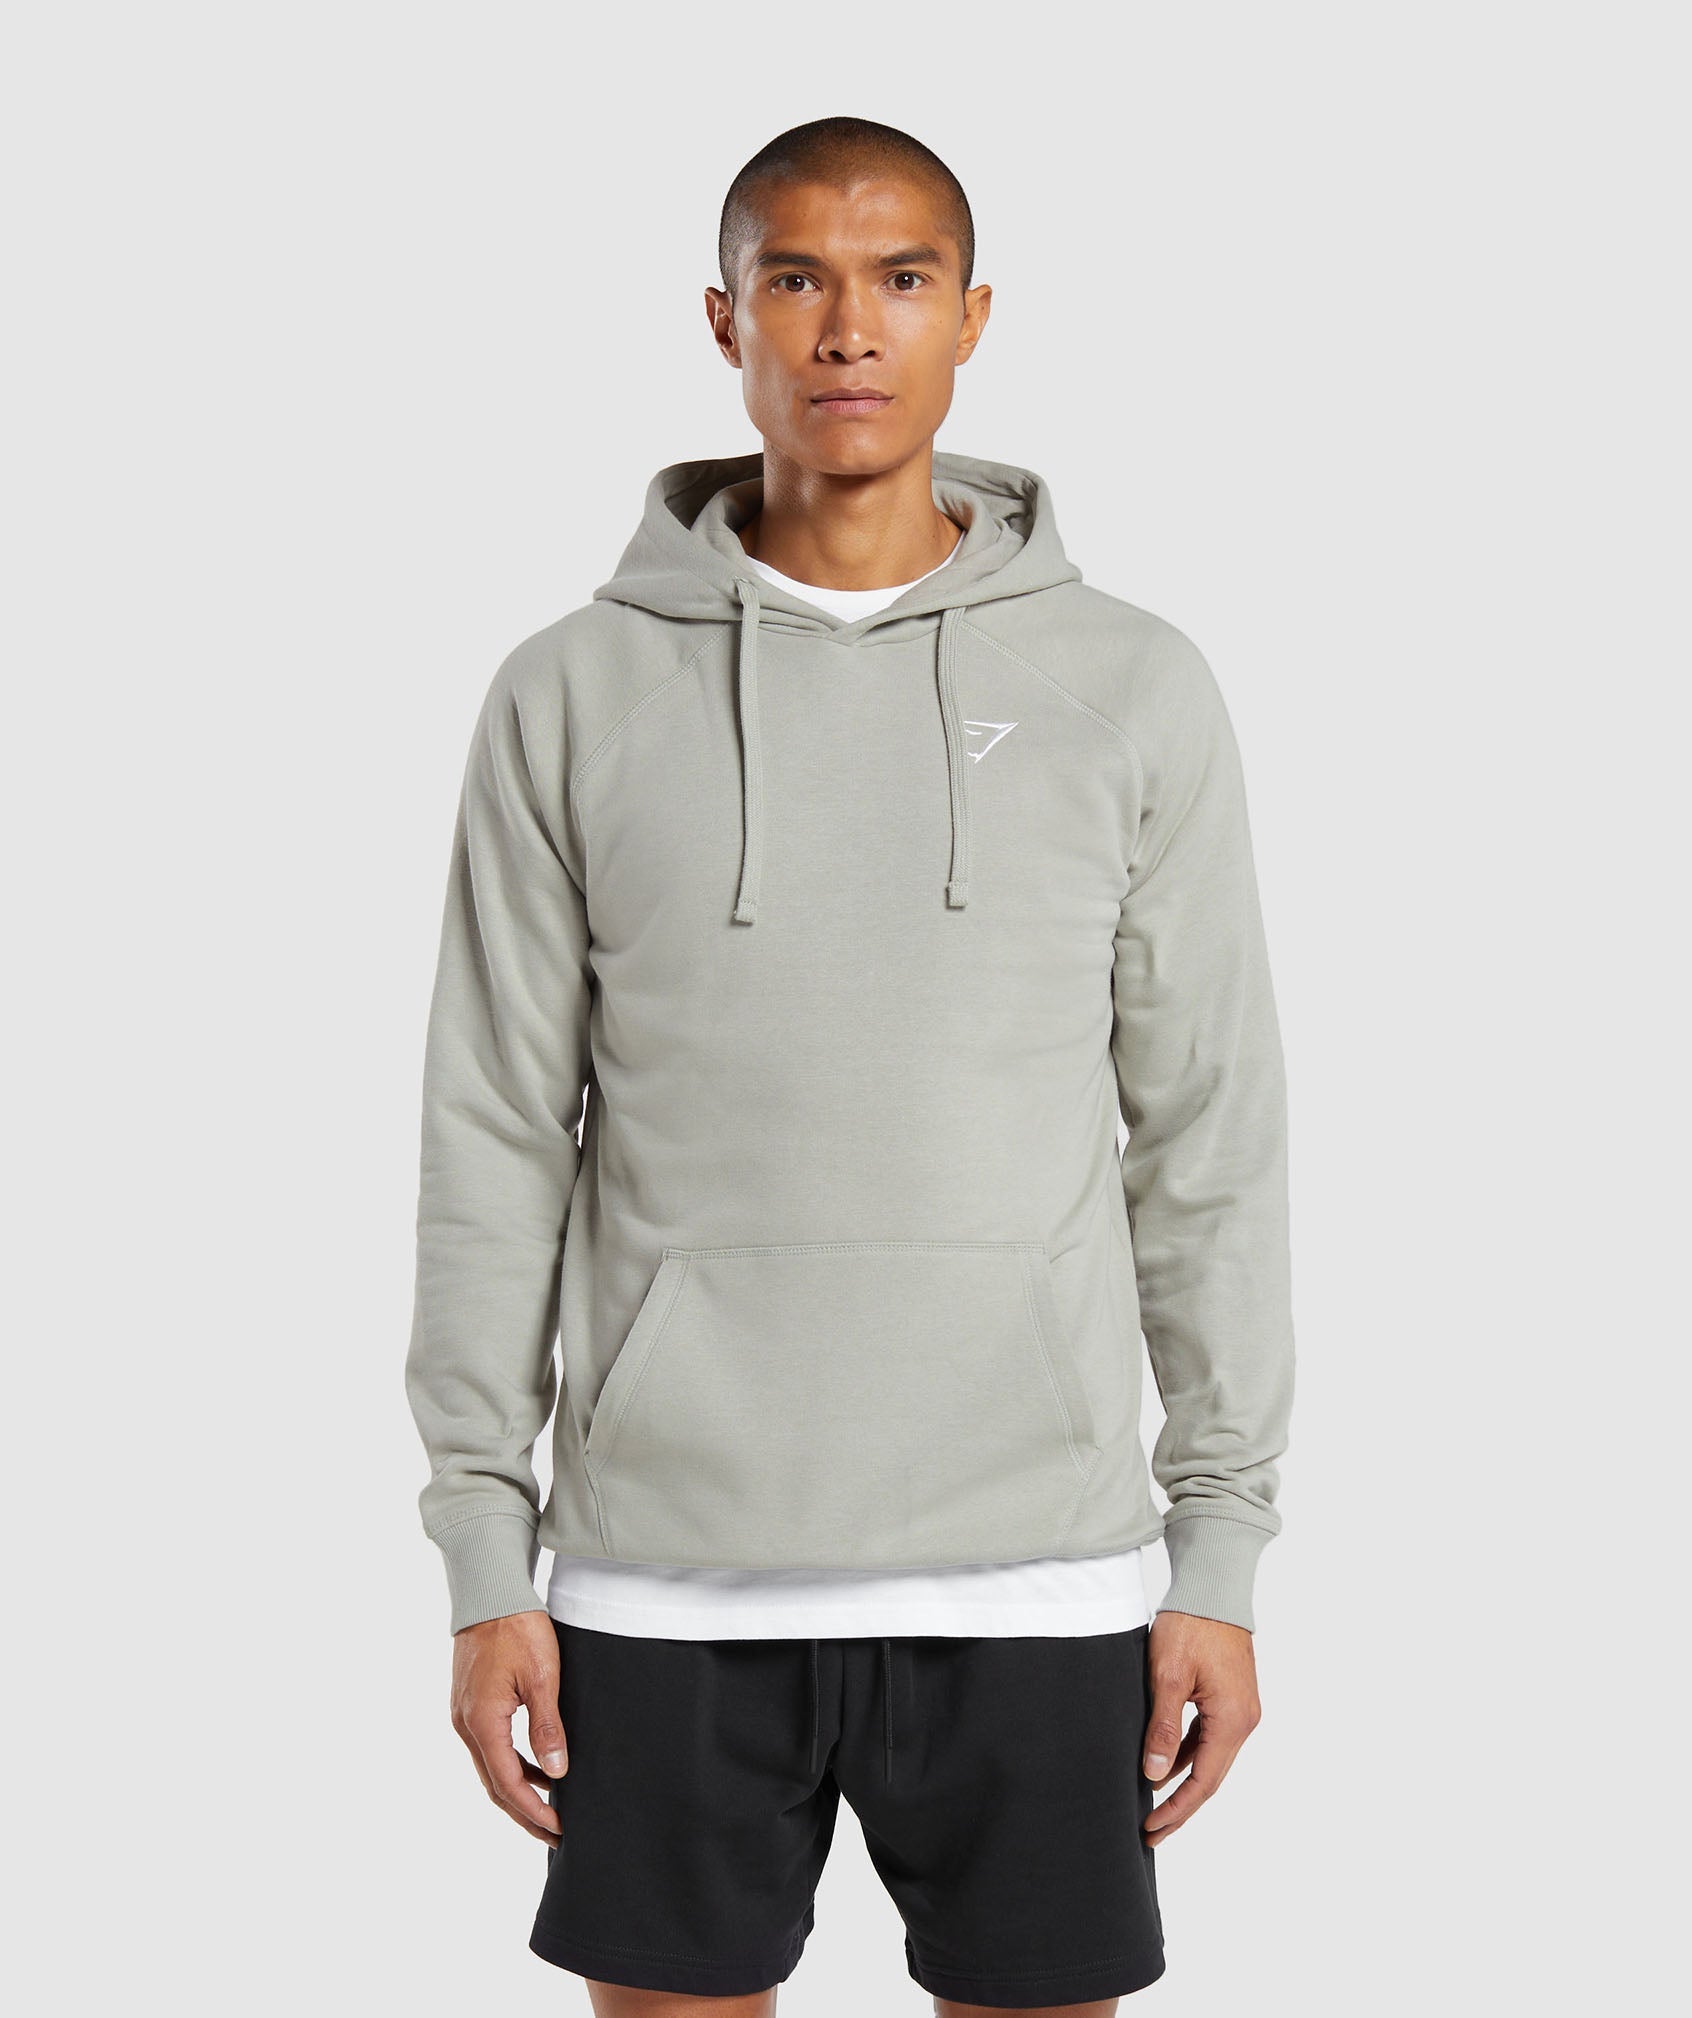 Crest Hoodie in Stone Grey - view 1